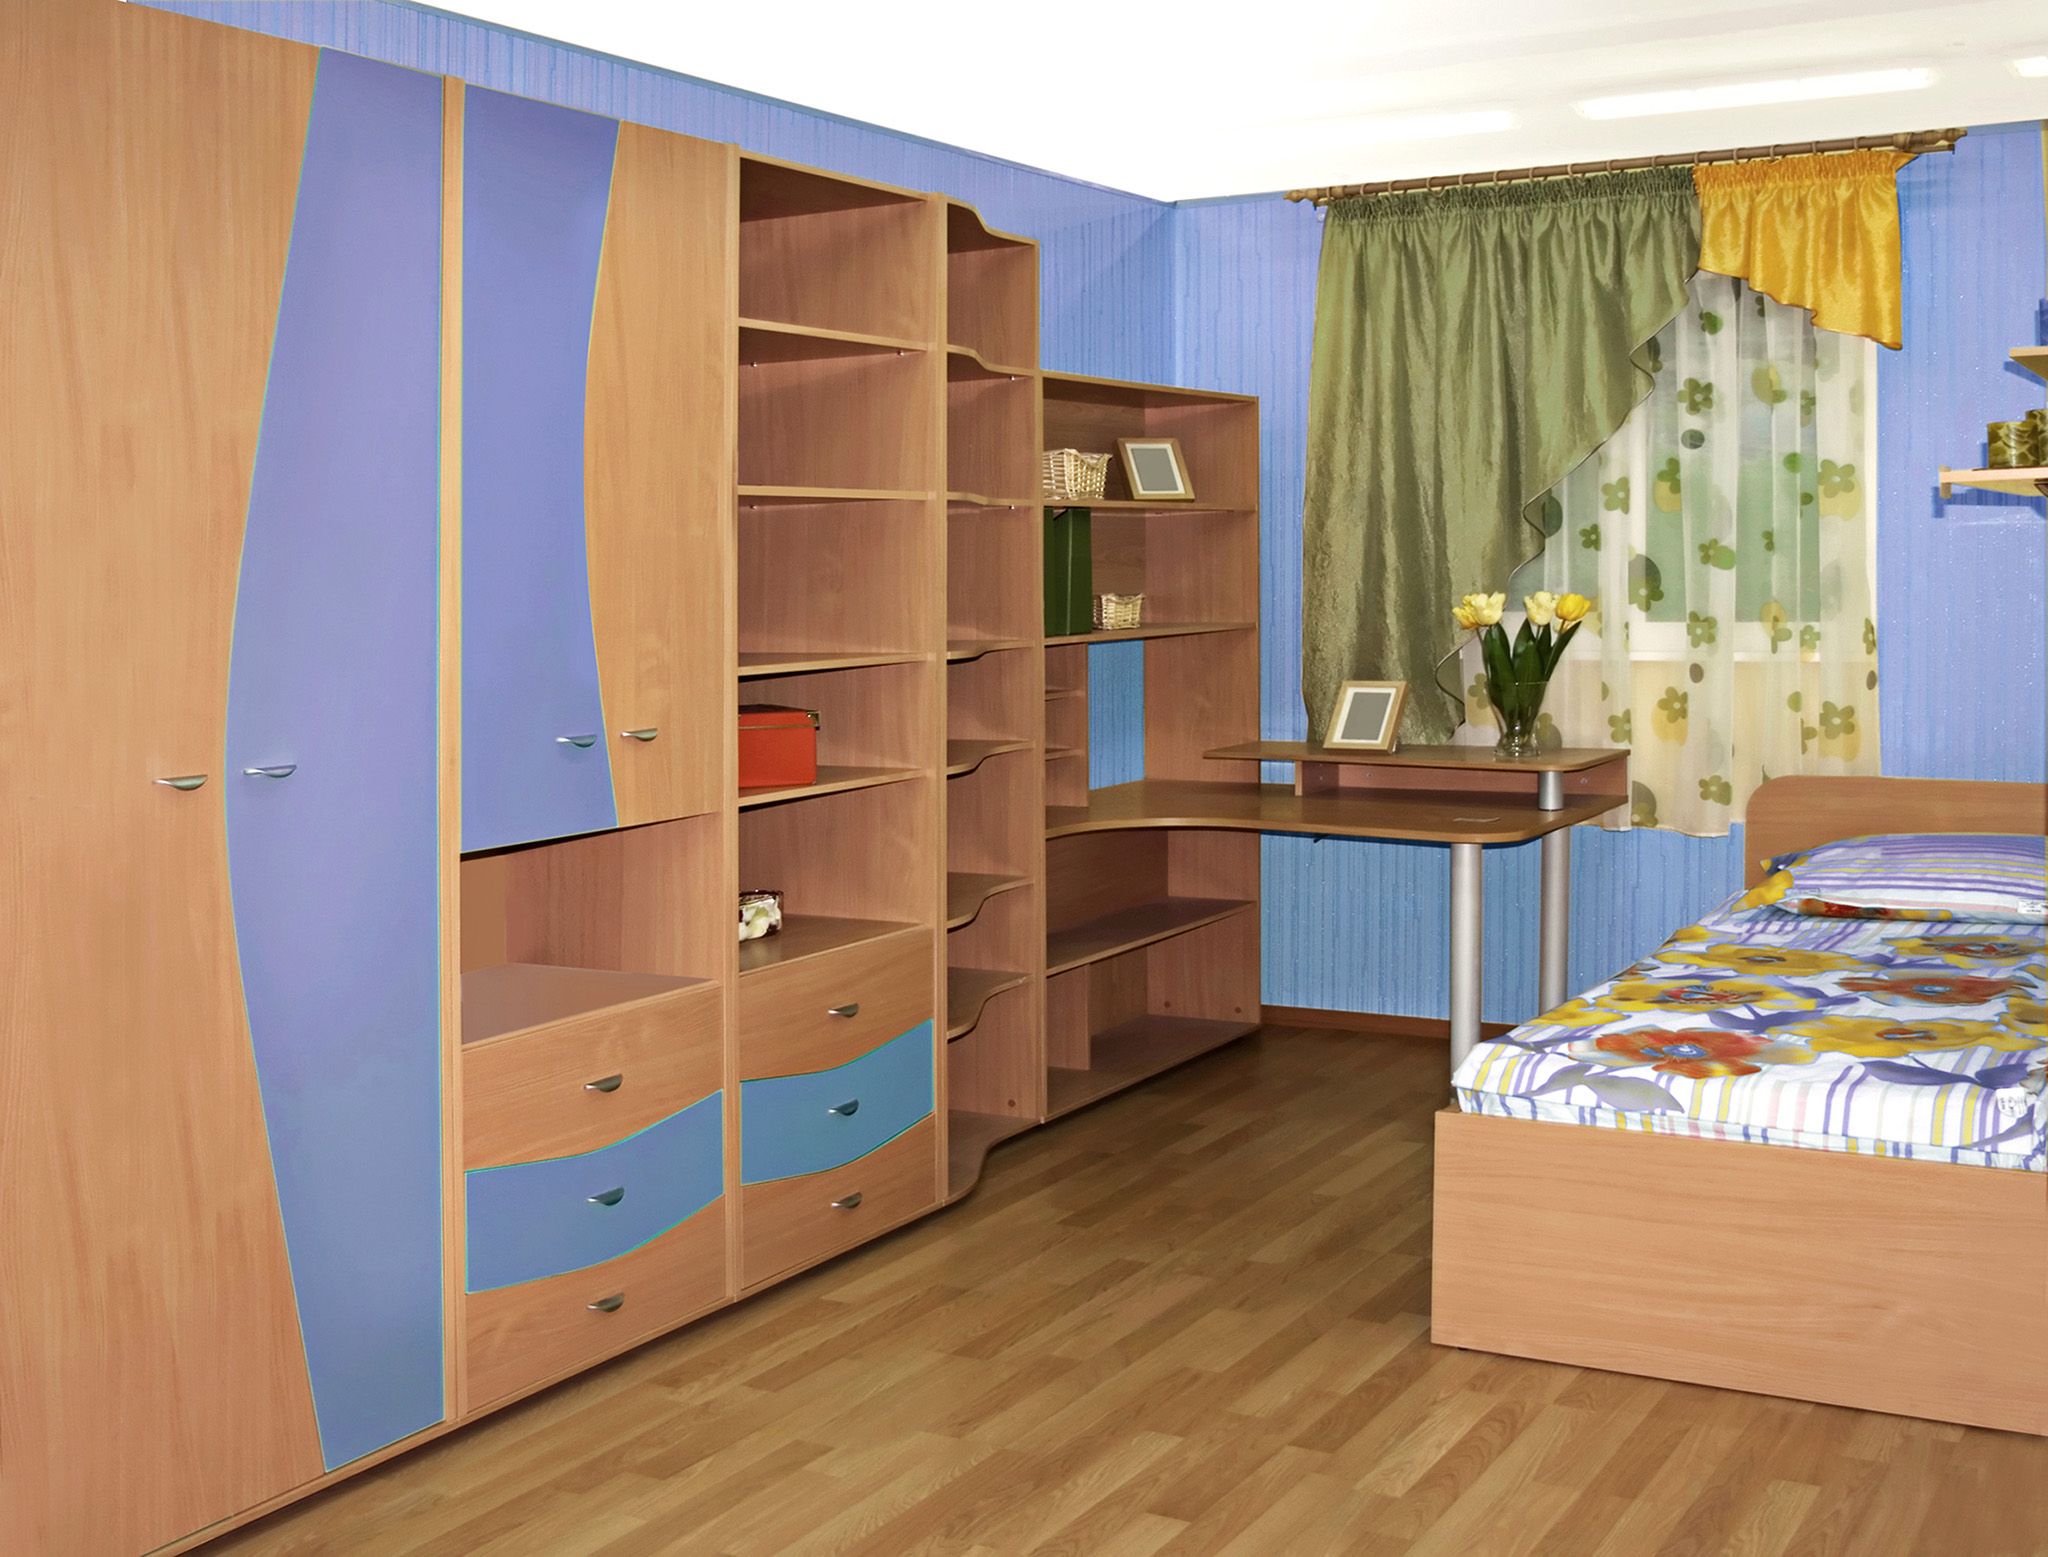 Fitted Wardrobes Ideas | Children's Bedroom Ideas Within Childrens Wardrobes With Drawers And Shelves (Gallery 16 of 20)